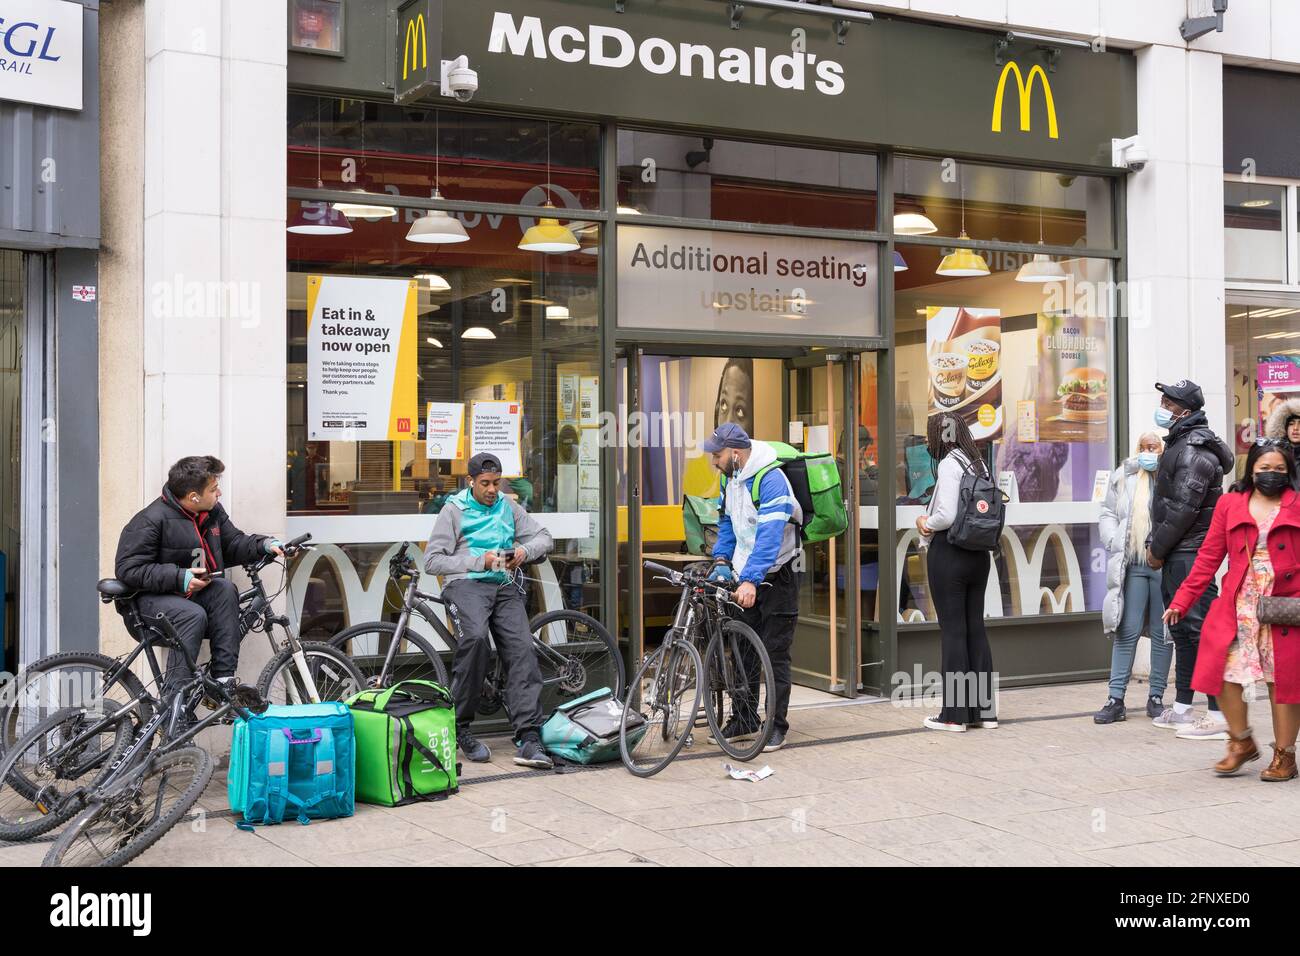 customers and couriers Deliveroo man queue outside McDonald's restaurant in Cutty Sark, Greenwich, London England food delivery UK Stock Photo